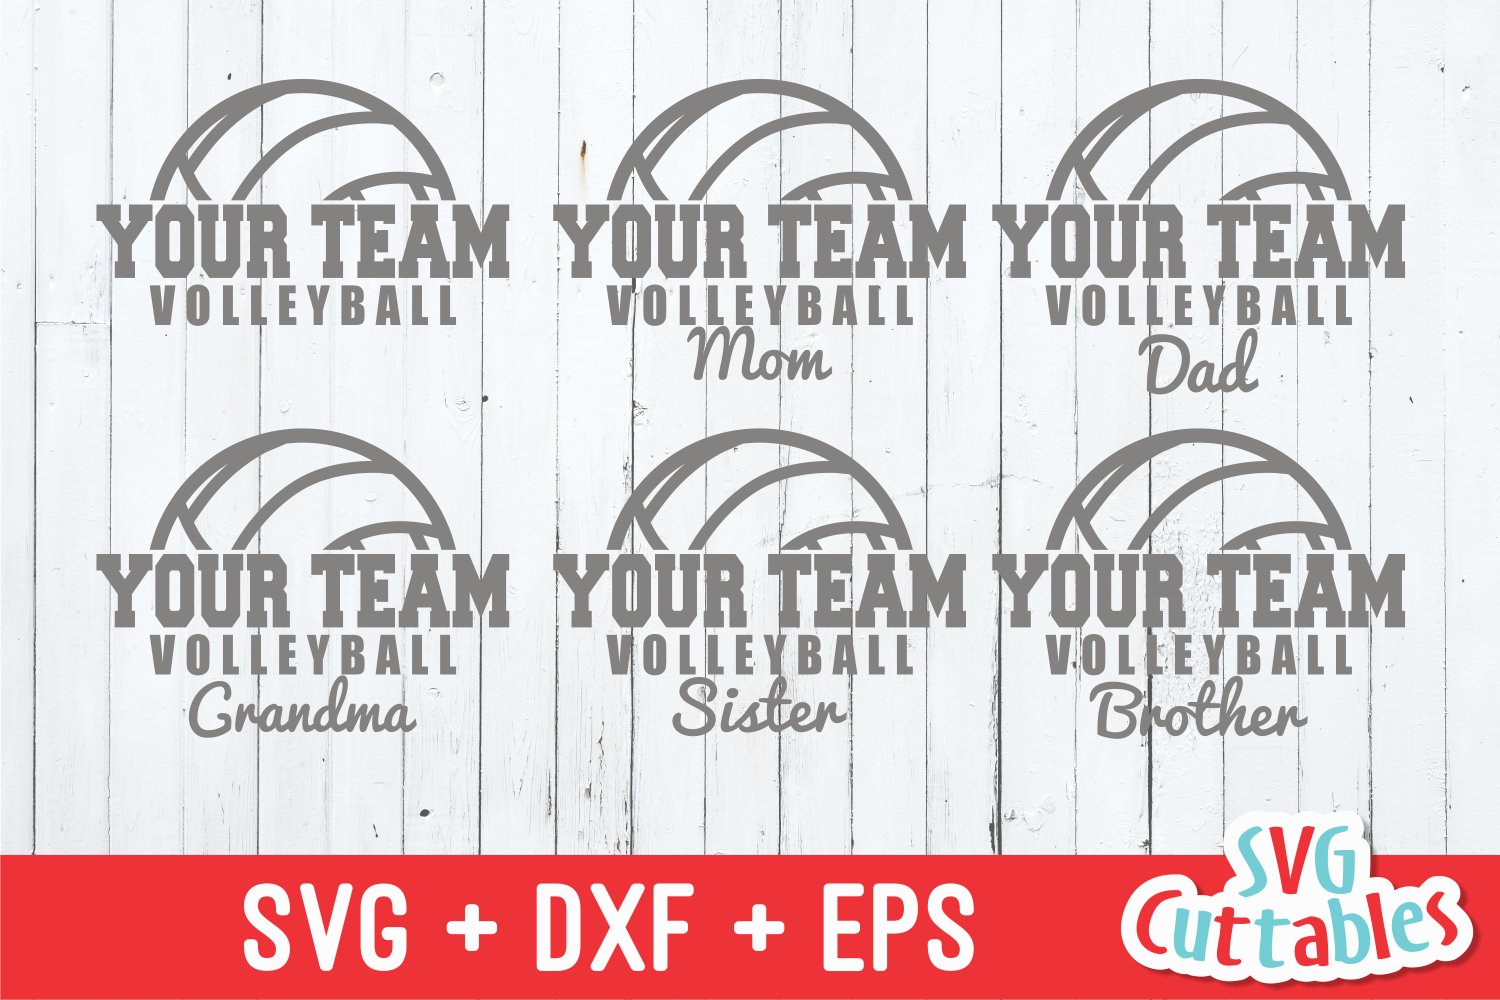 Volleyball family design.